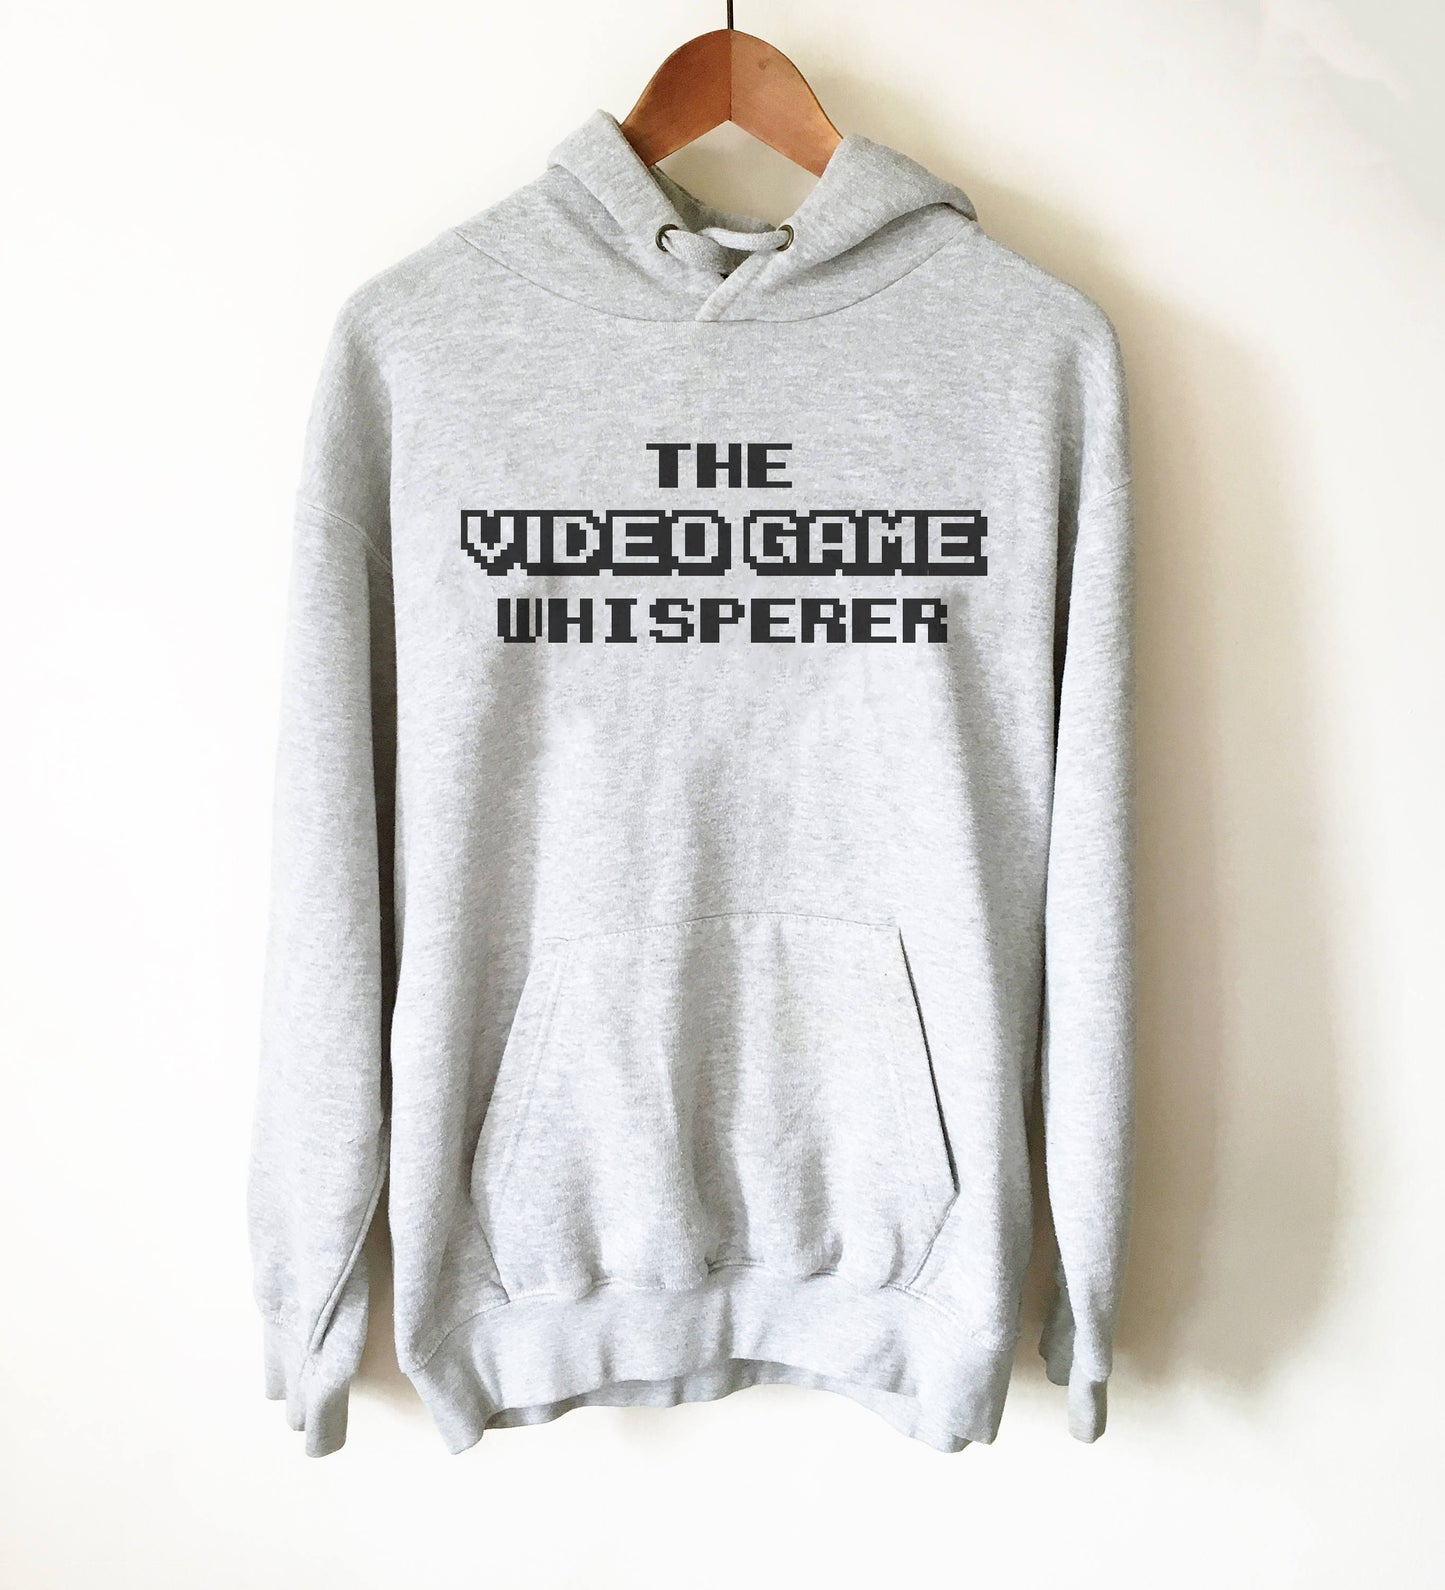 The Video Game Whisperer Hoodie - Videogame tshirt, Videogame gift, Video game shirt, Gaming gift, Gaming shirt